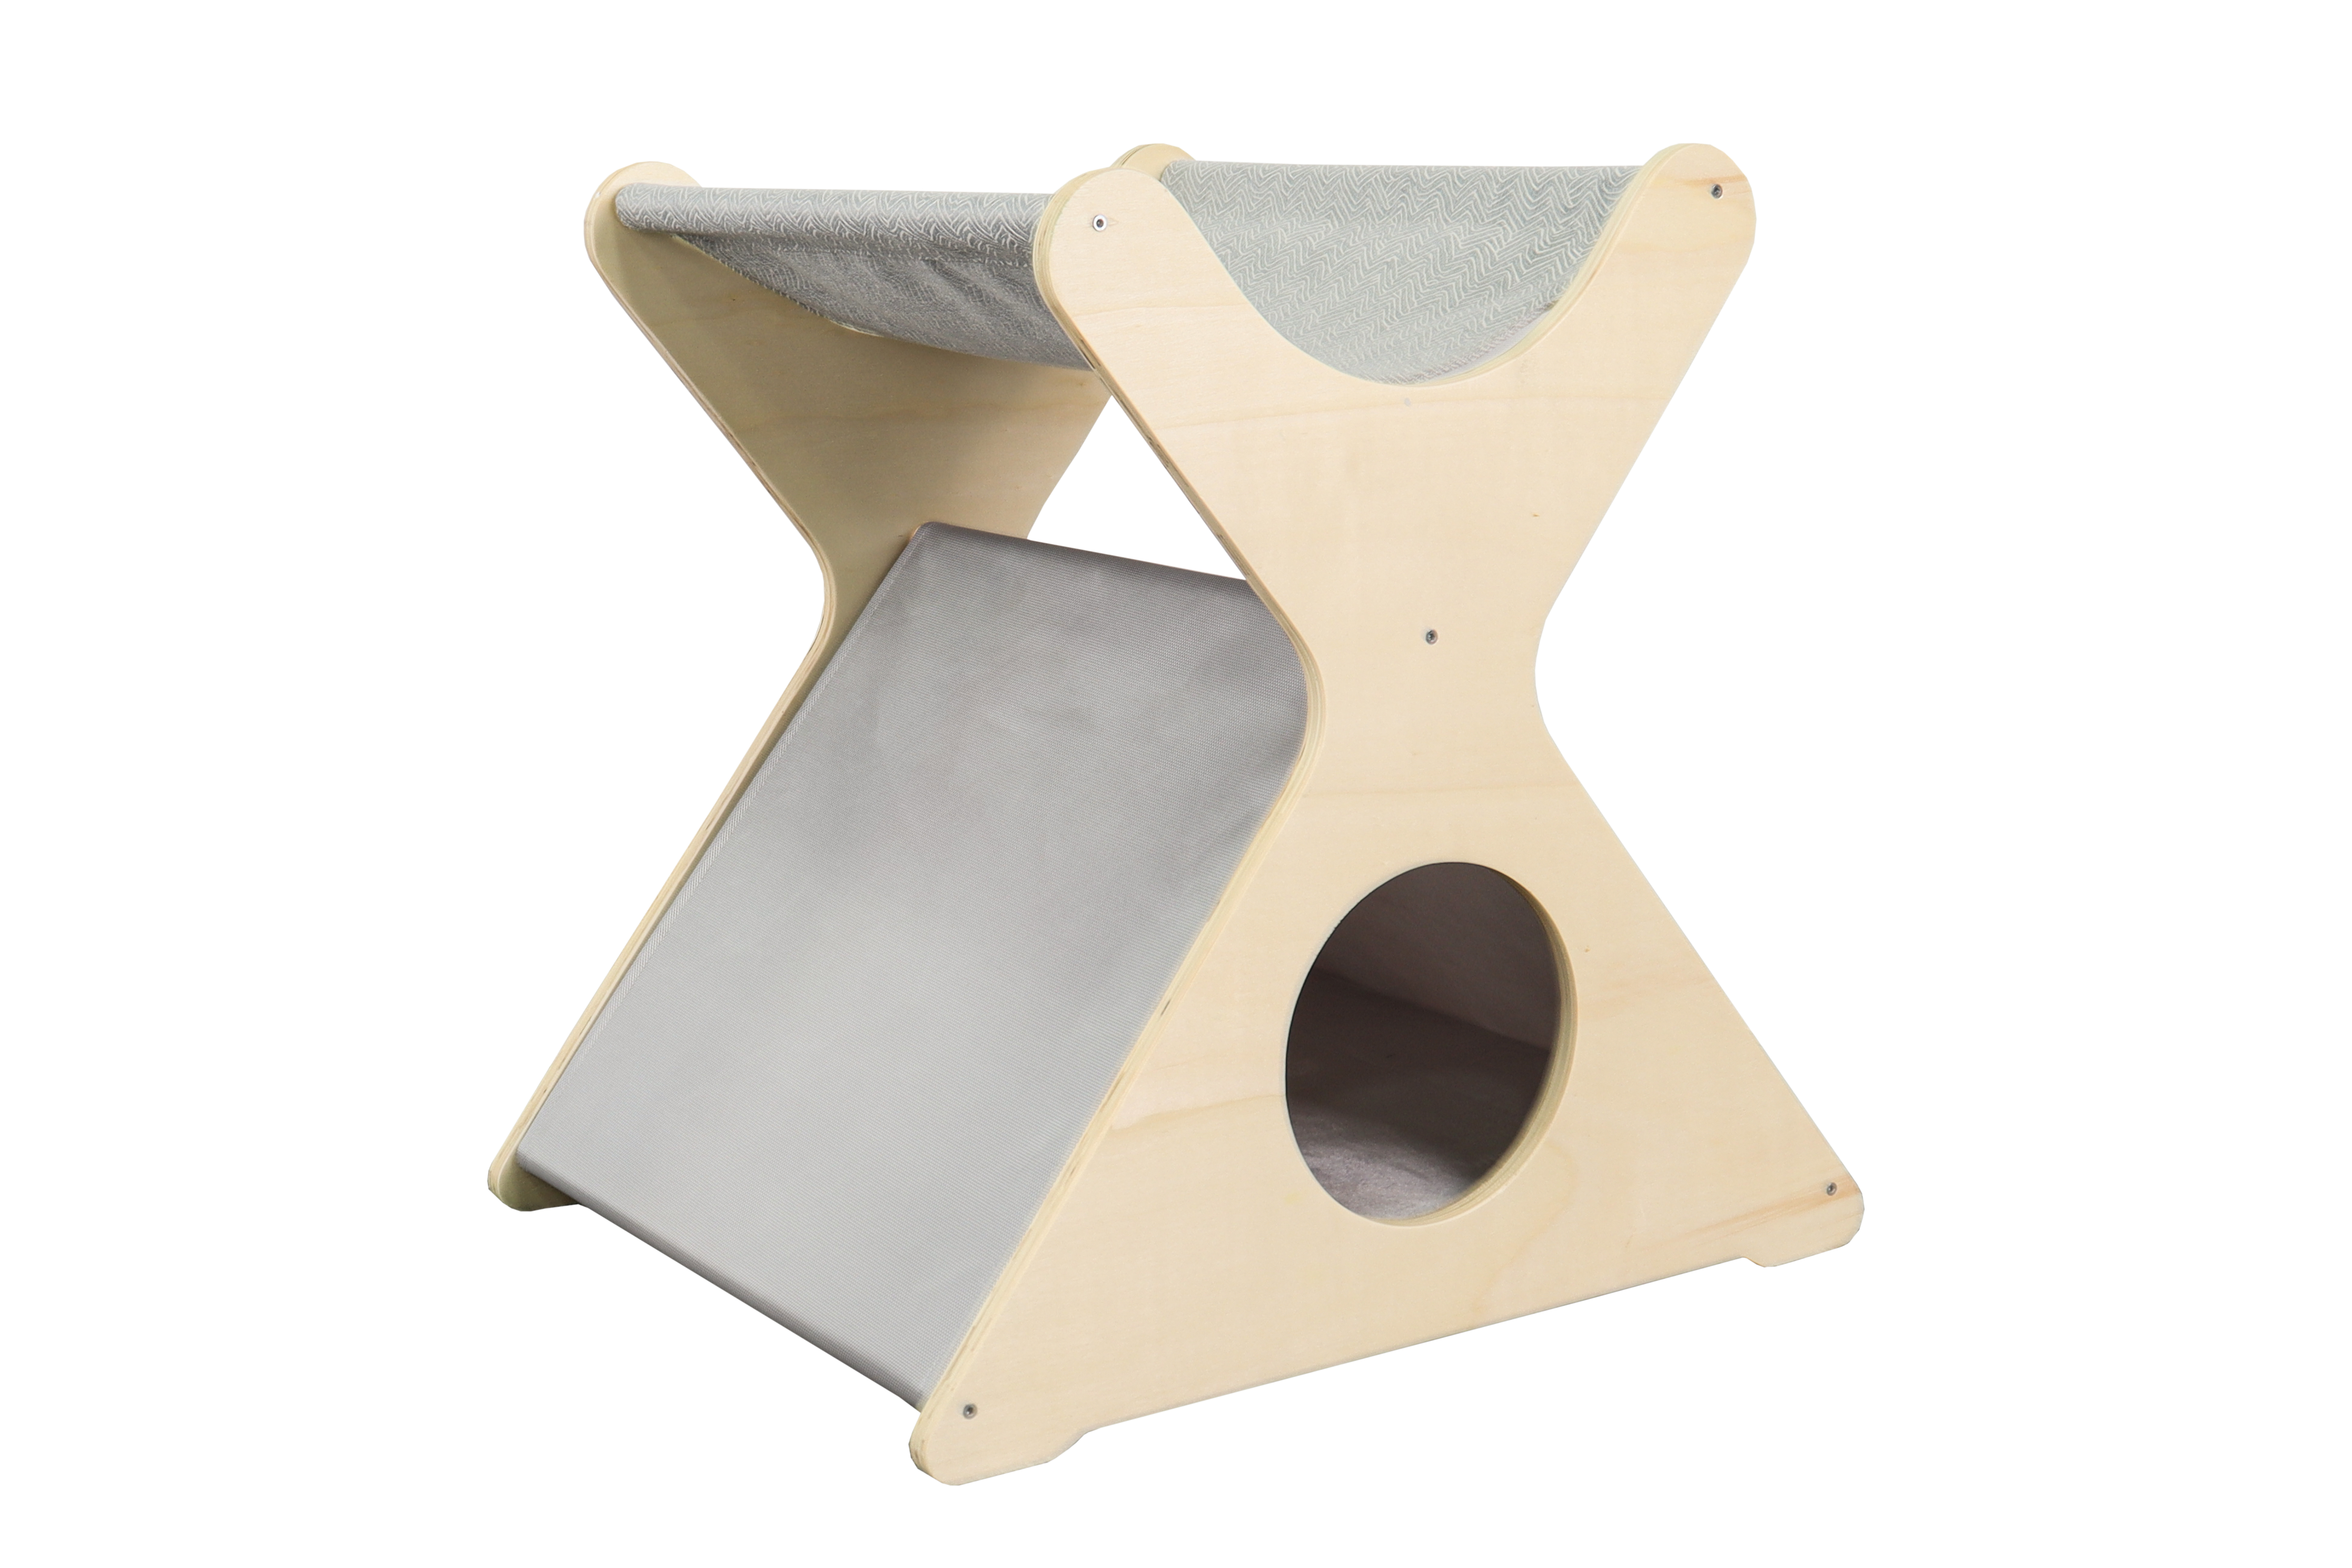 CB-PBM121140 X-Shaped Warm Cat House, Cat Shelter With Removable Soft Mat, Easy To Assemble